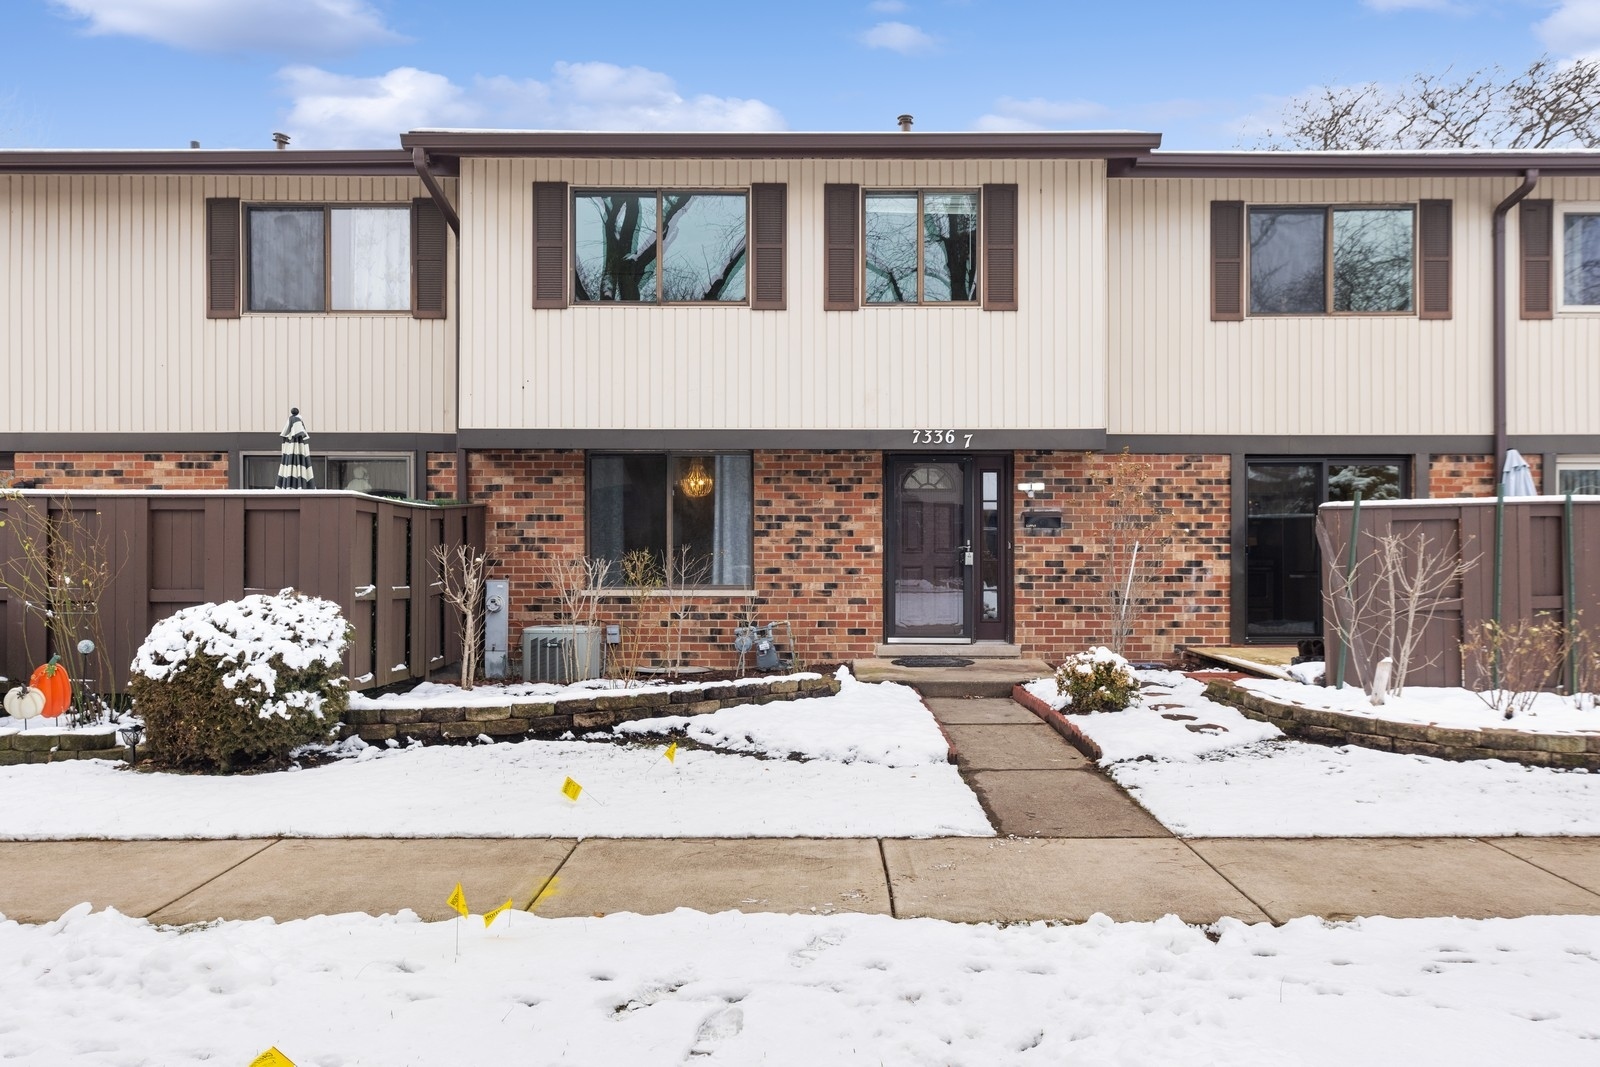 7336 Winthrop Way, Unit 7, Downers Grove, Il 60516